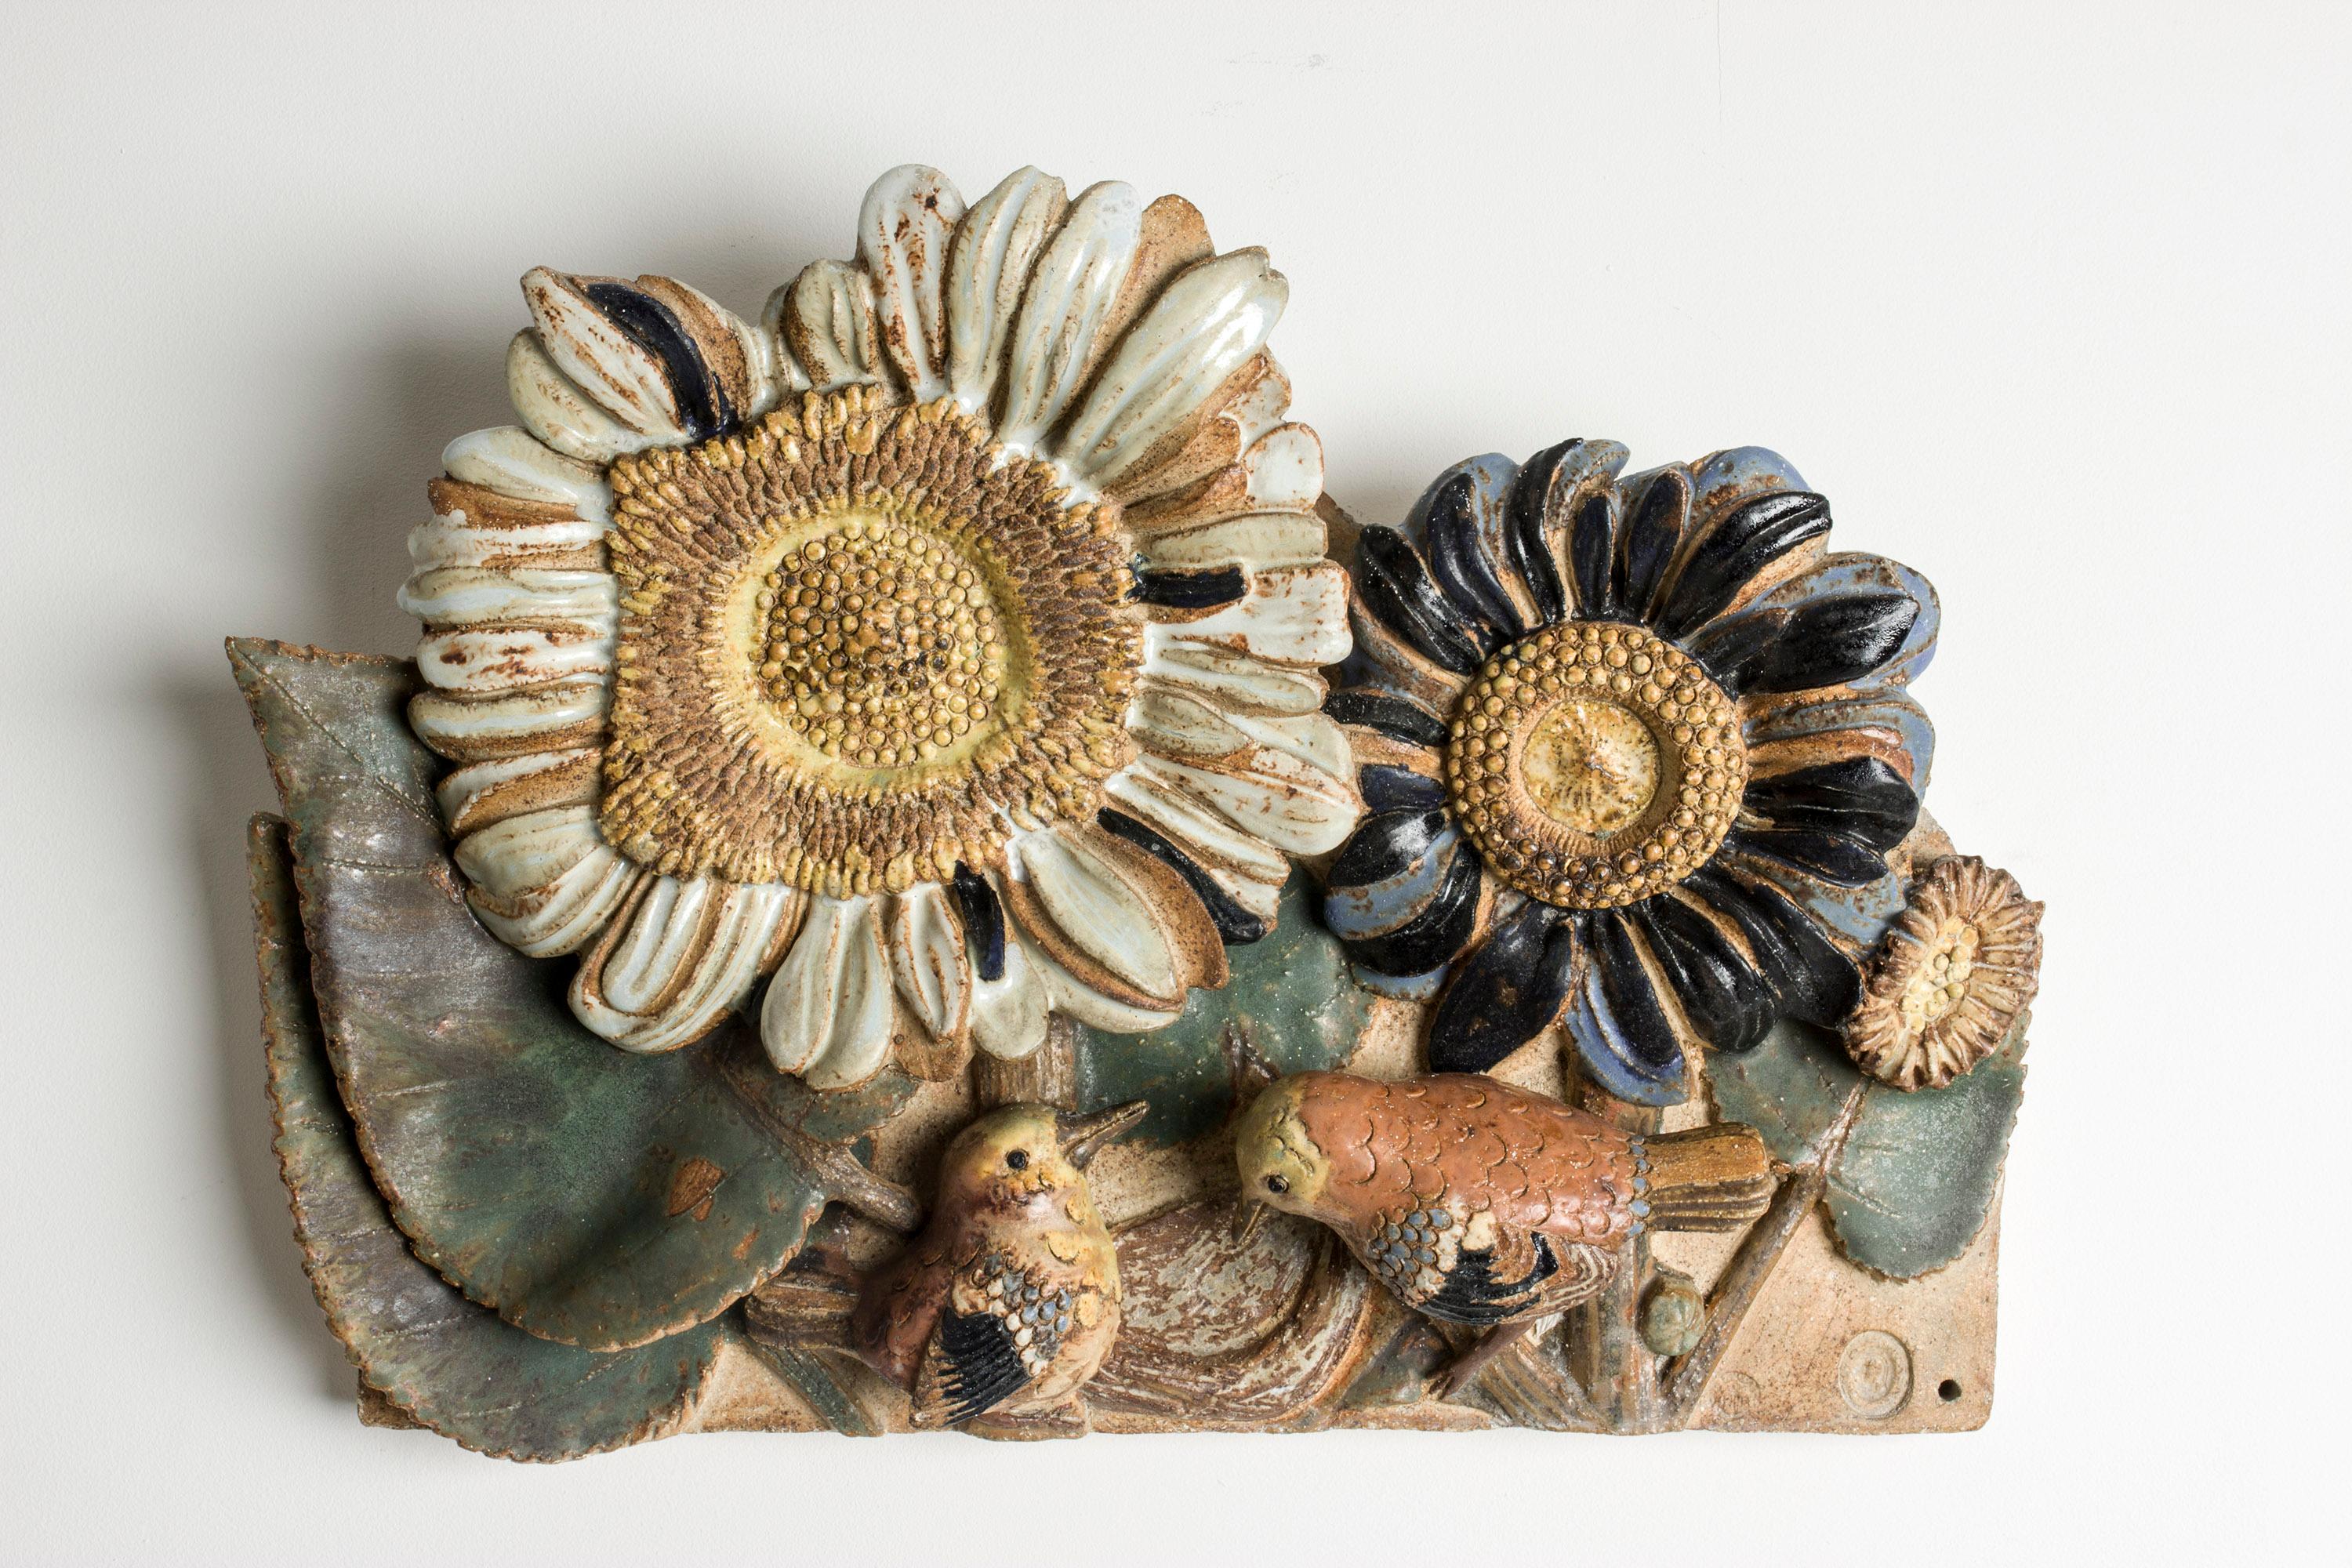 Striking stoneware wall relief by Tyra Lundgren, in a colorful, buoyant design of sunflowers and birds. Birds, delicate and expressive, were a recurring theme in Tyra Lundgren’s work. The wall reliefs were often made so that they could be arranged